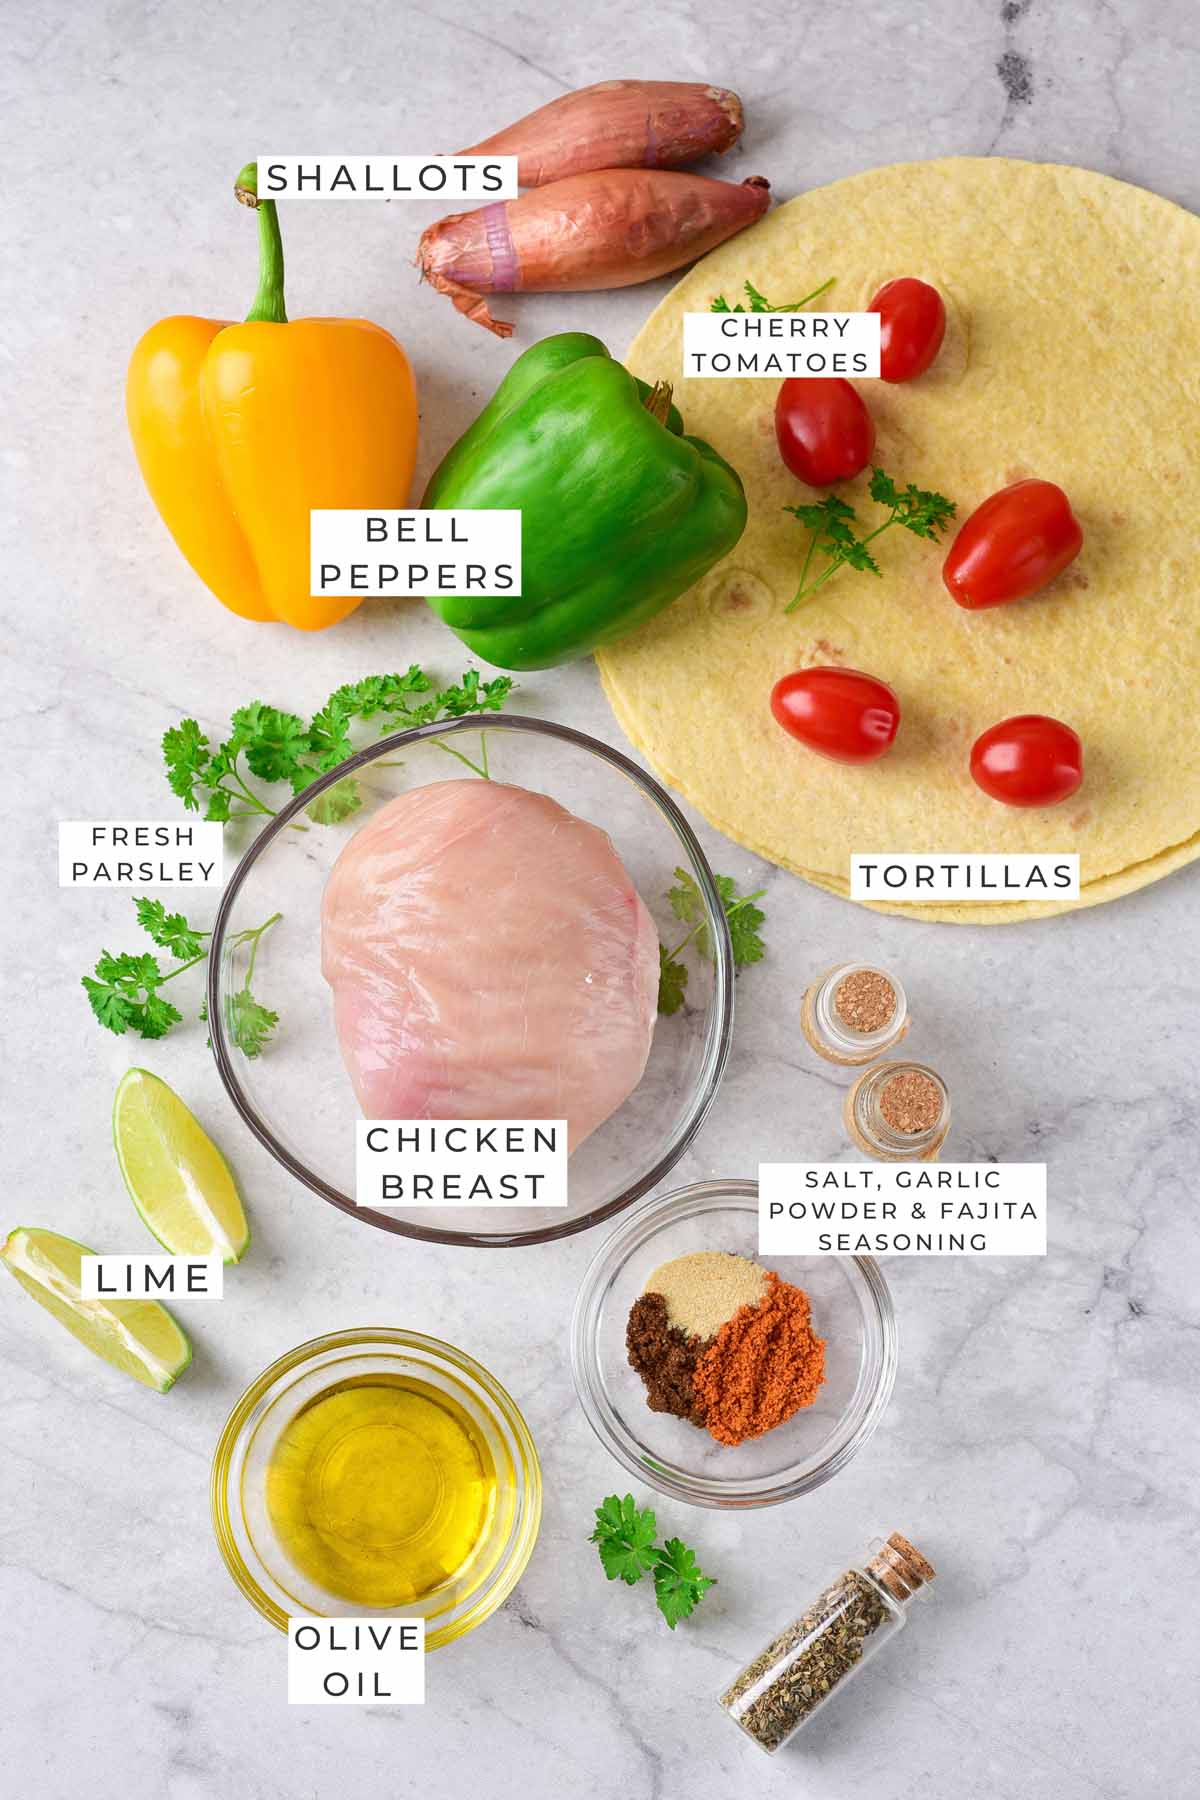 Labeled ingredients for the fajitas.